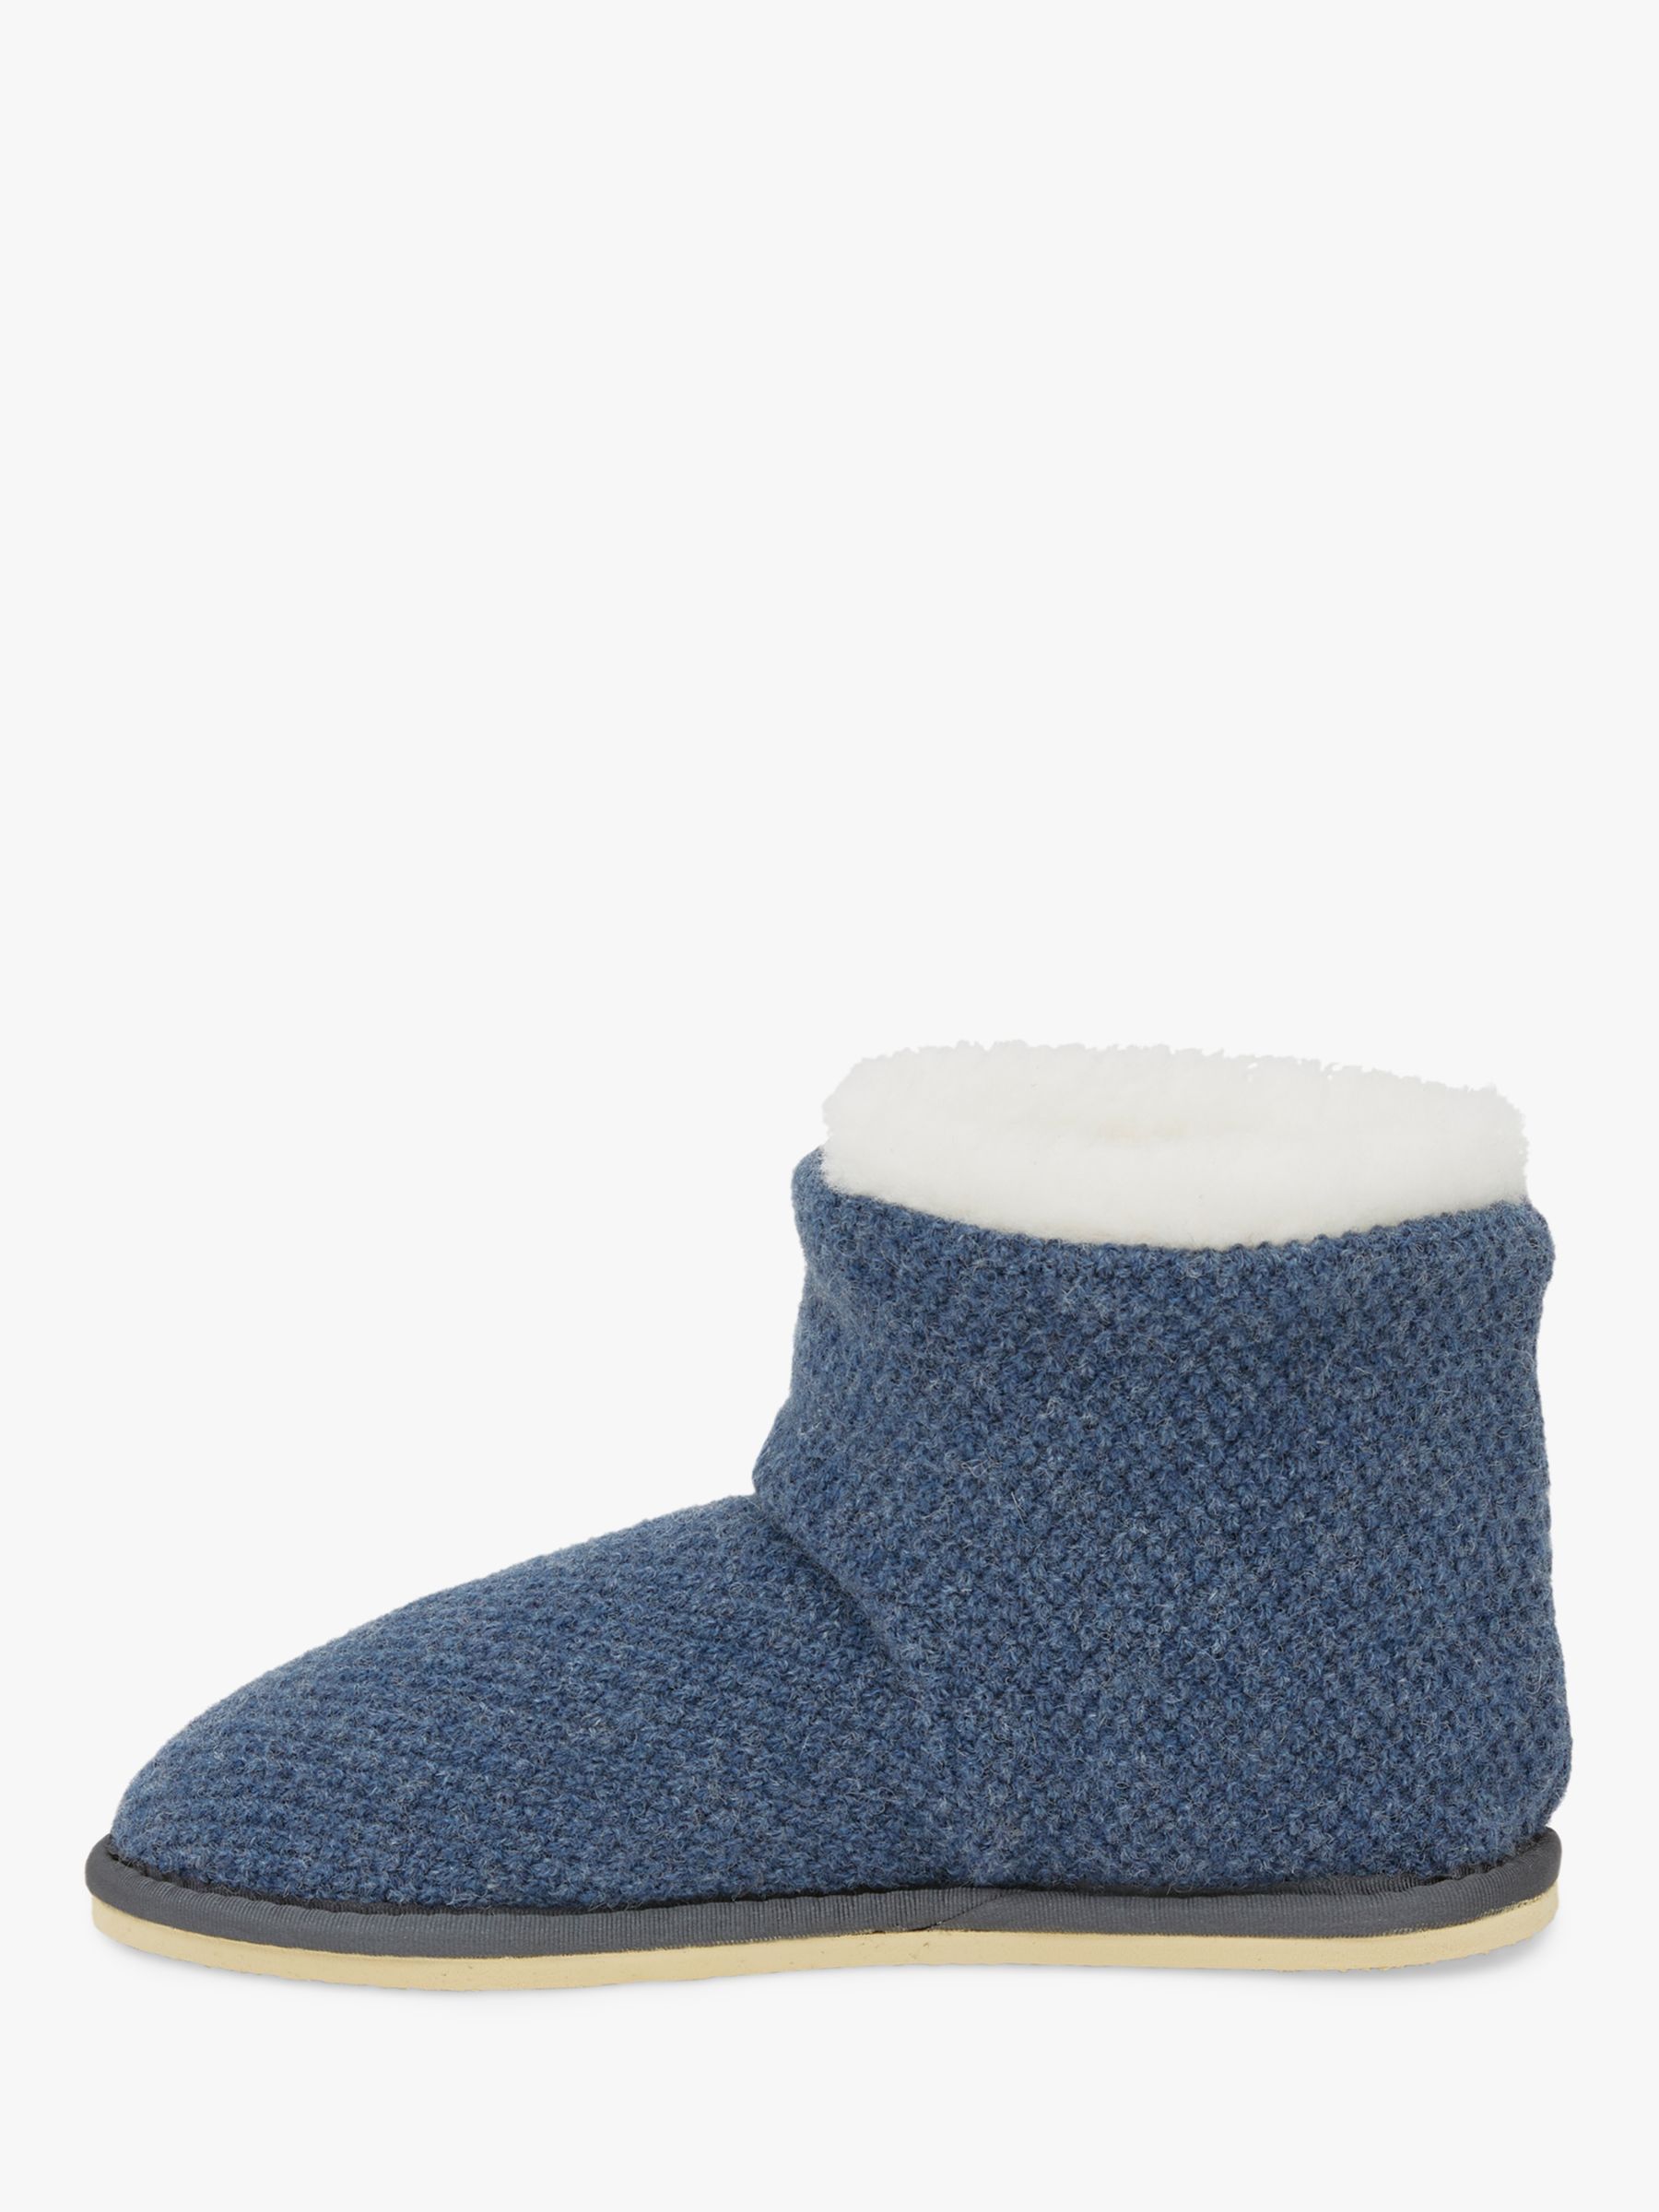 Celtic & Co. Knitted Boot Slippers, Indigo at John Lewis & Partners